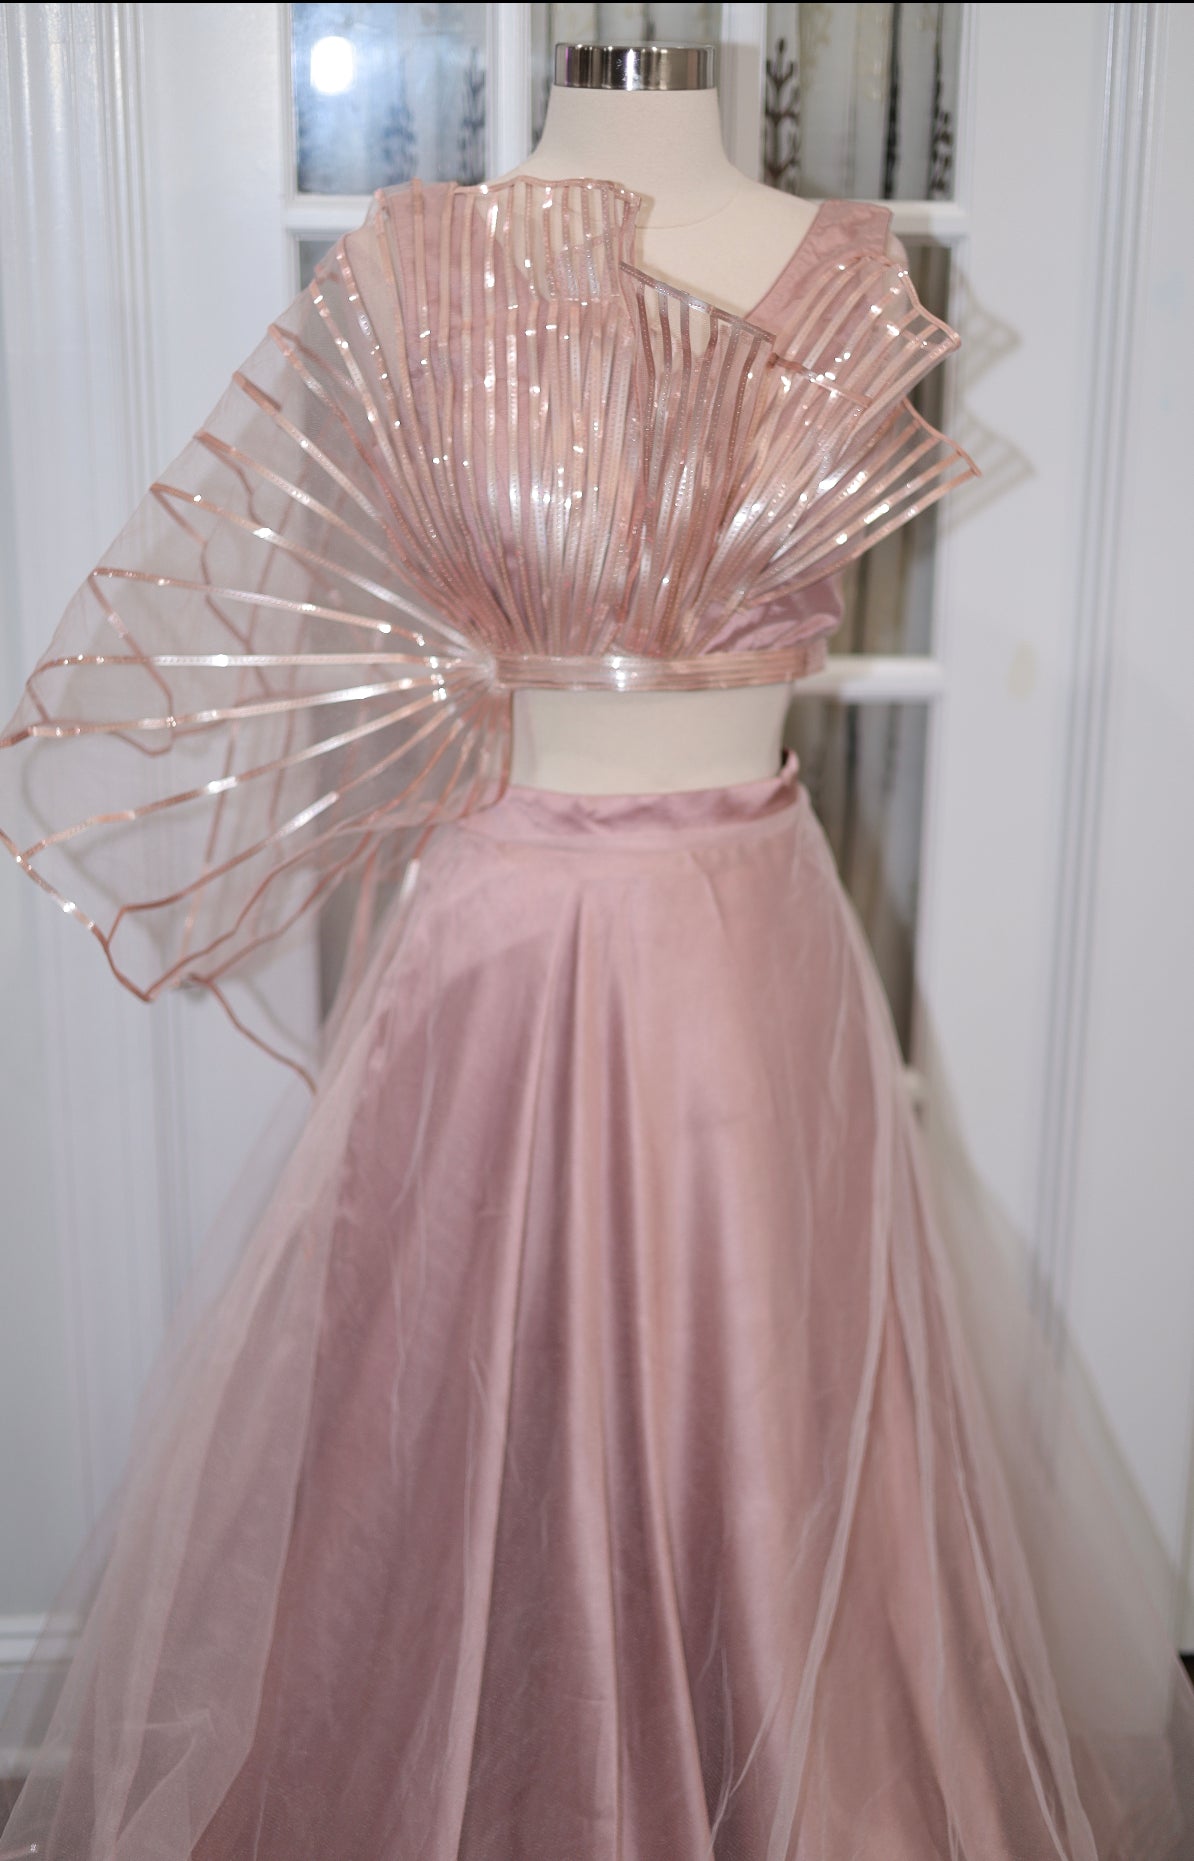 Metallic Rose Gold Flowy Top with Skirt